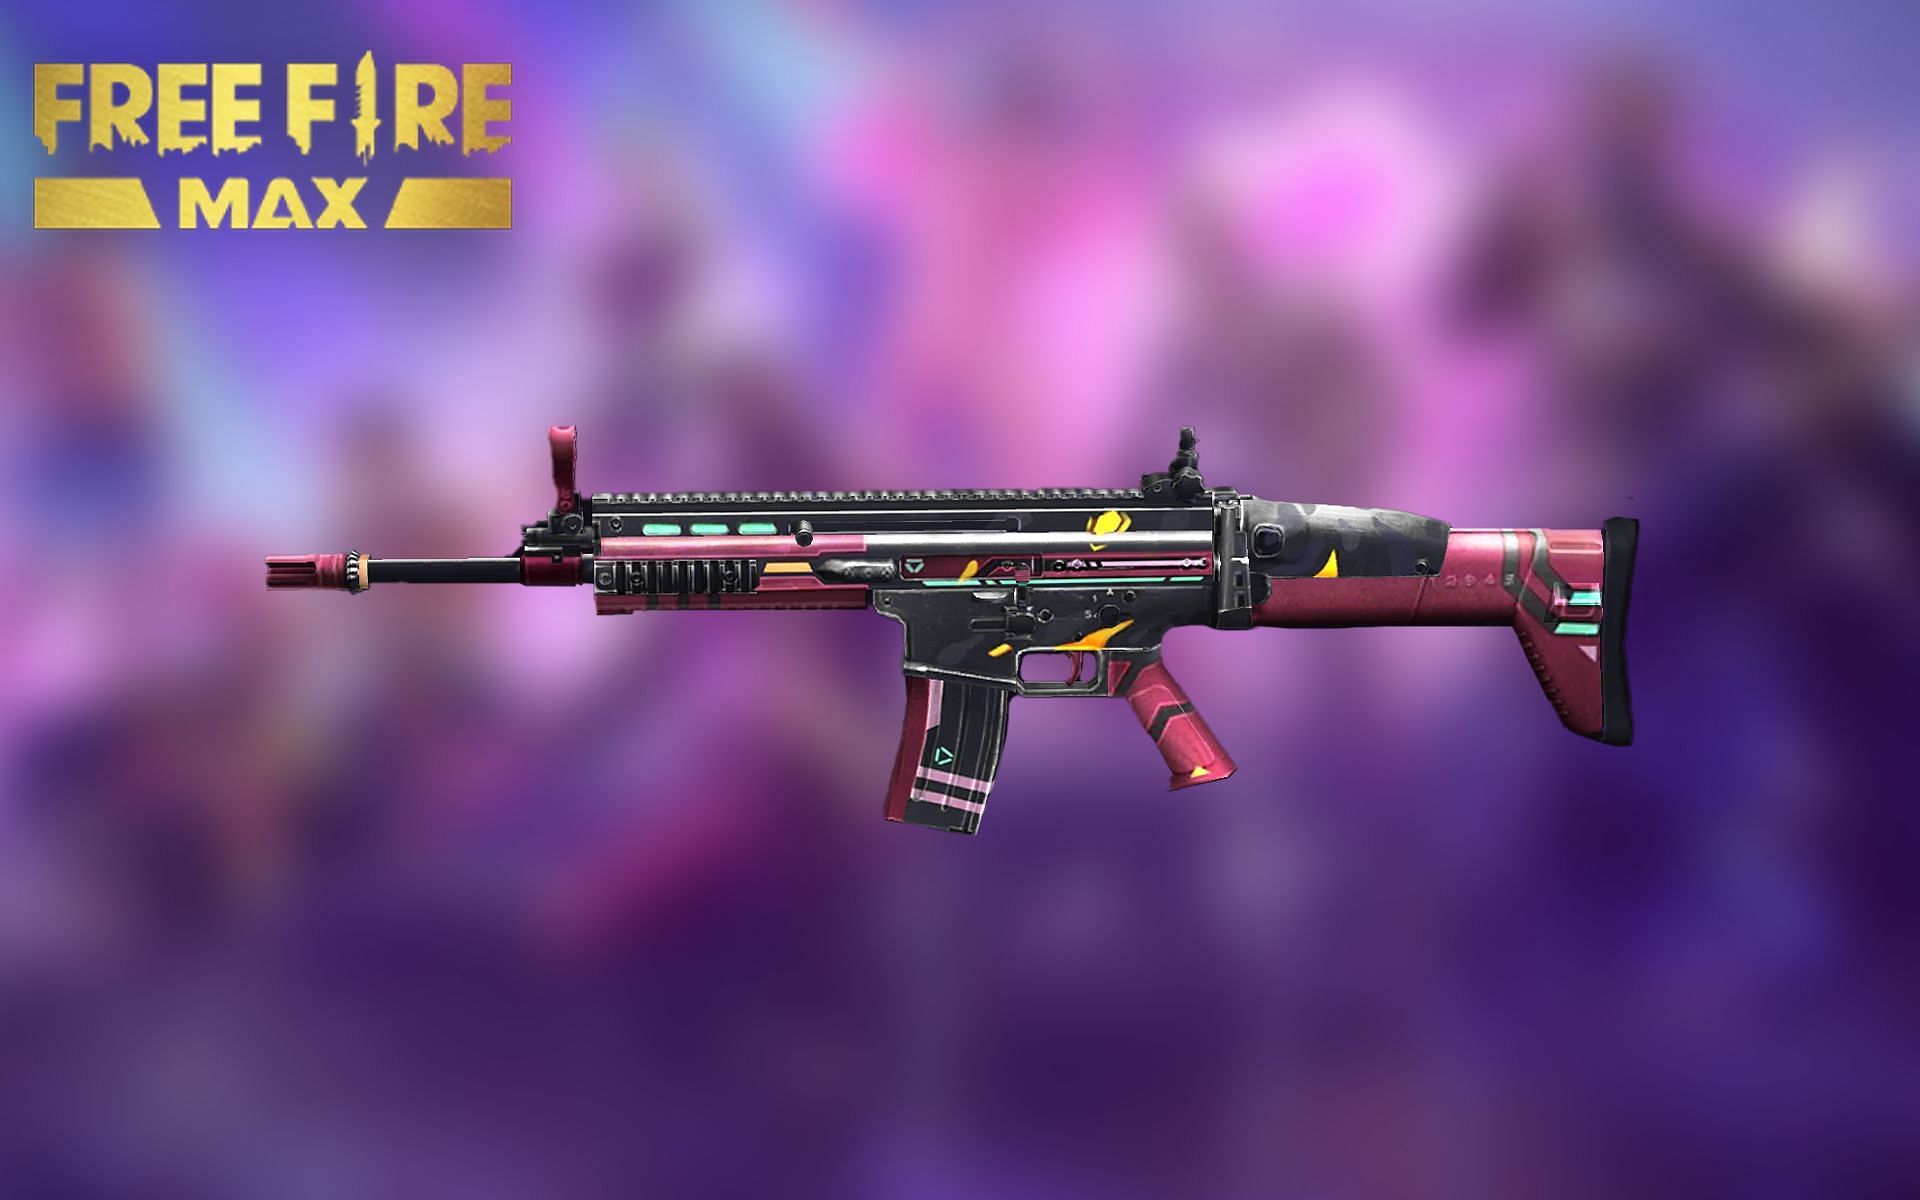 The gun skin that users can get in the game (Image via Sportskeeda)